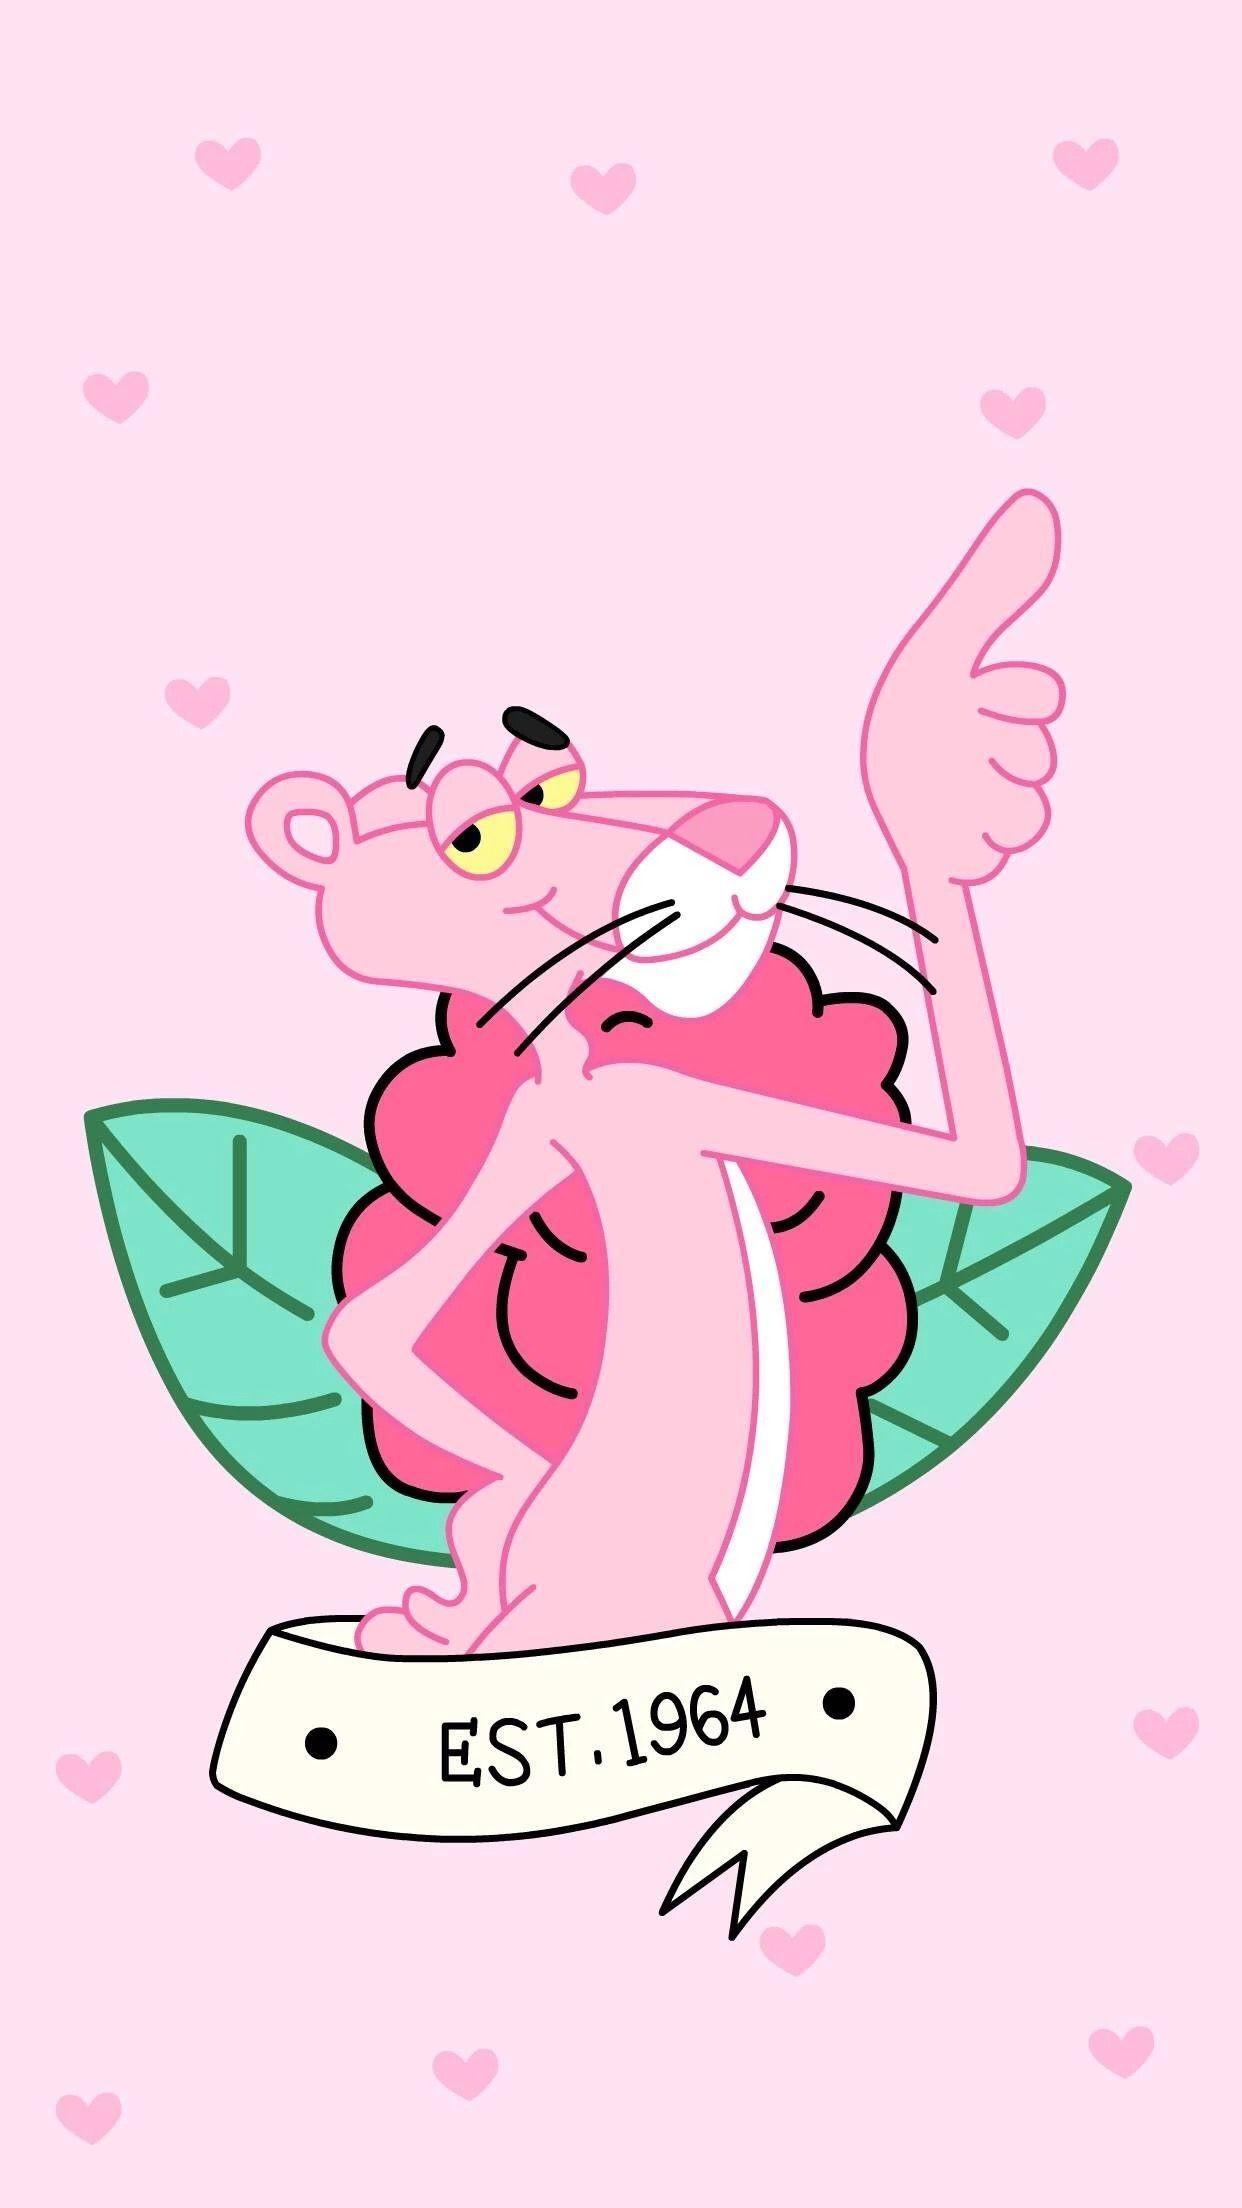 Pink Panther Lovers image 384074 HD wallpapers and backgrounds photos